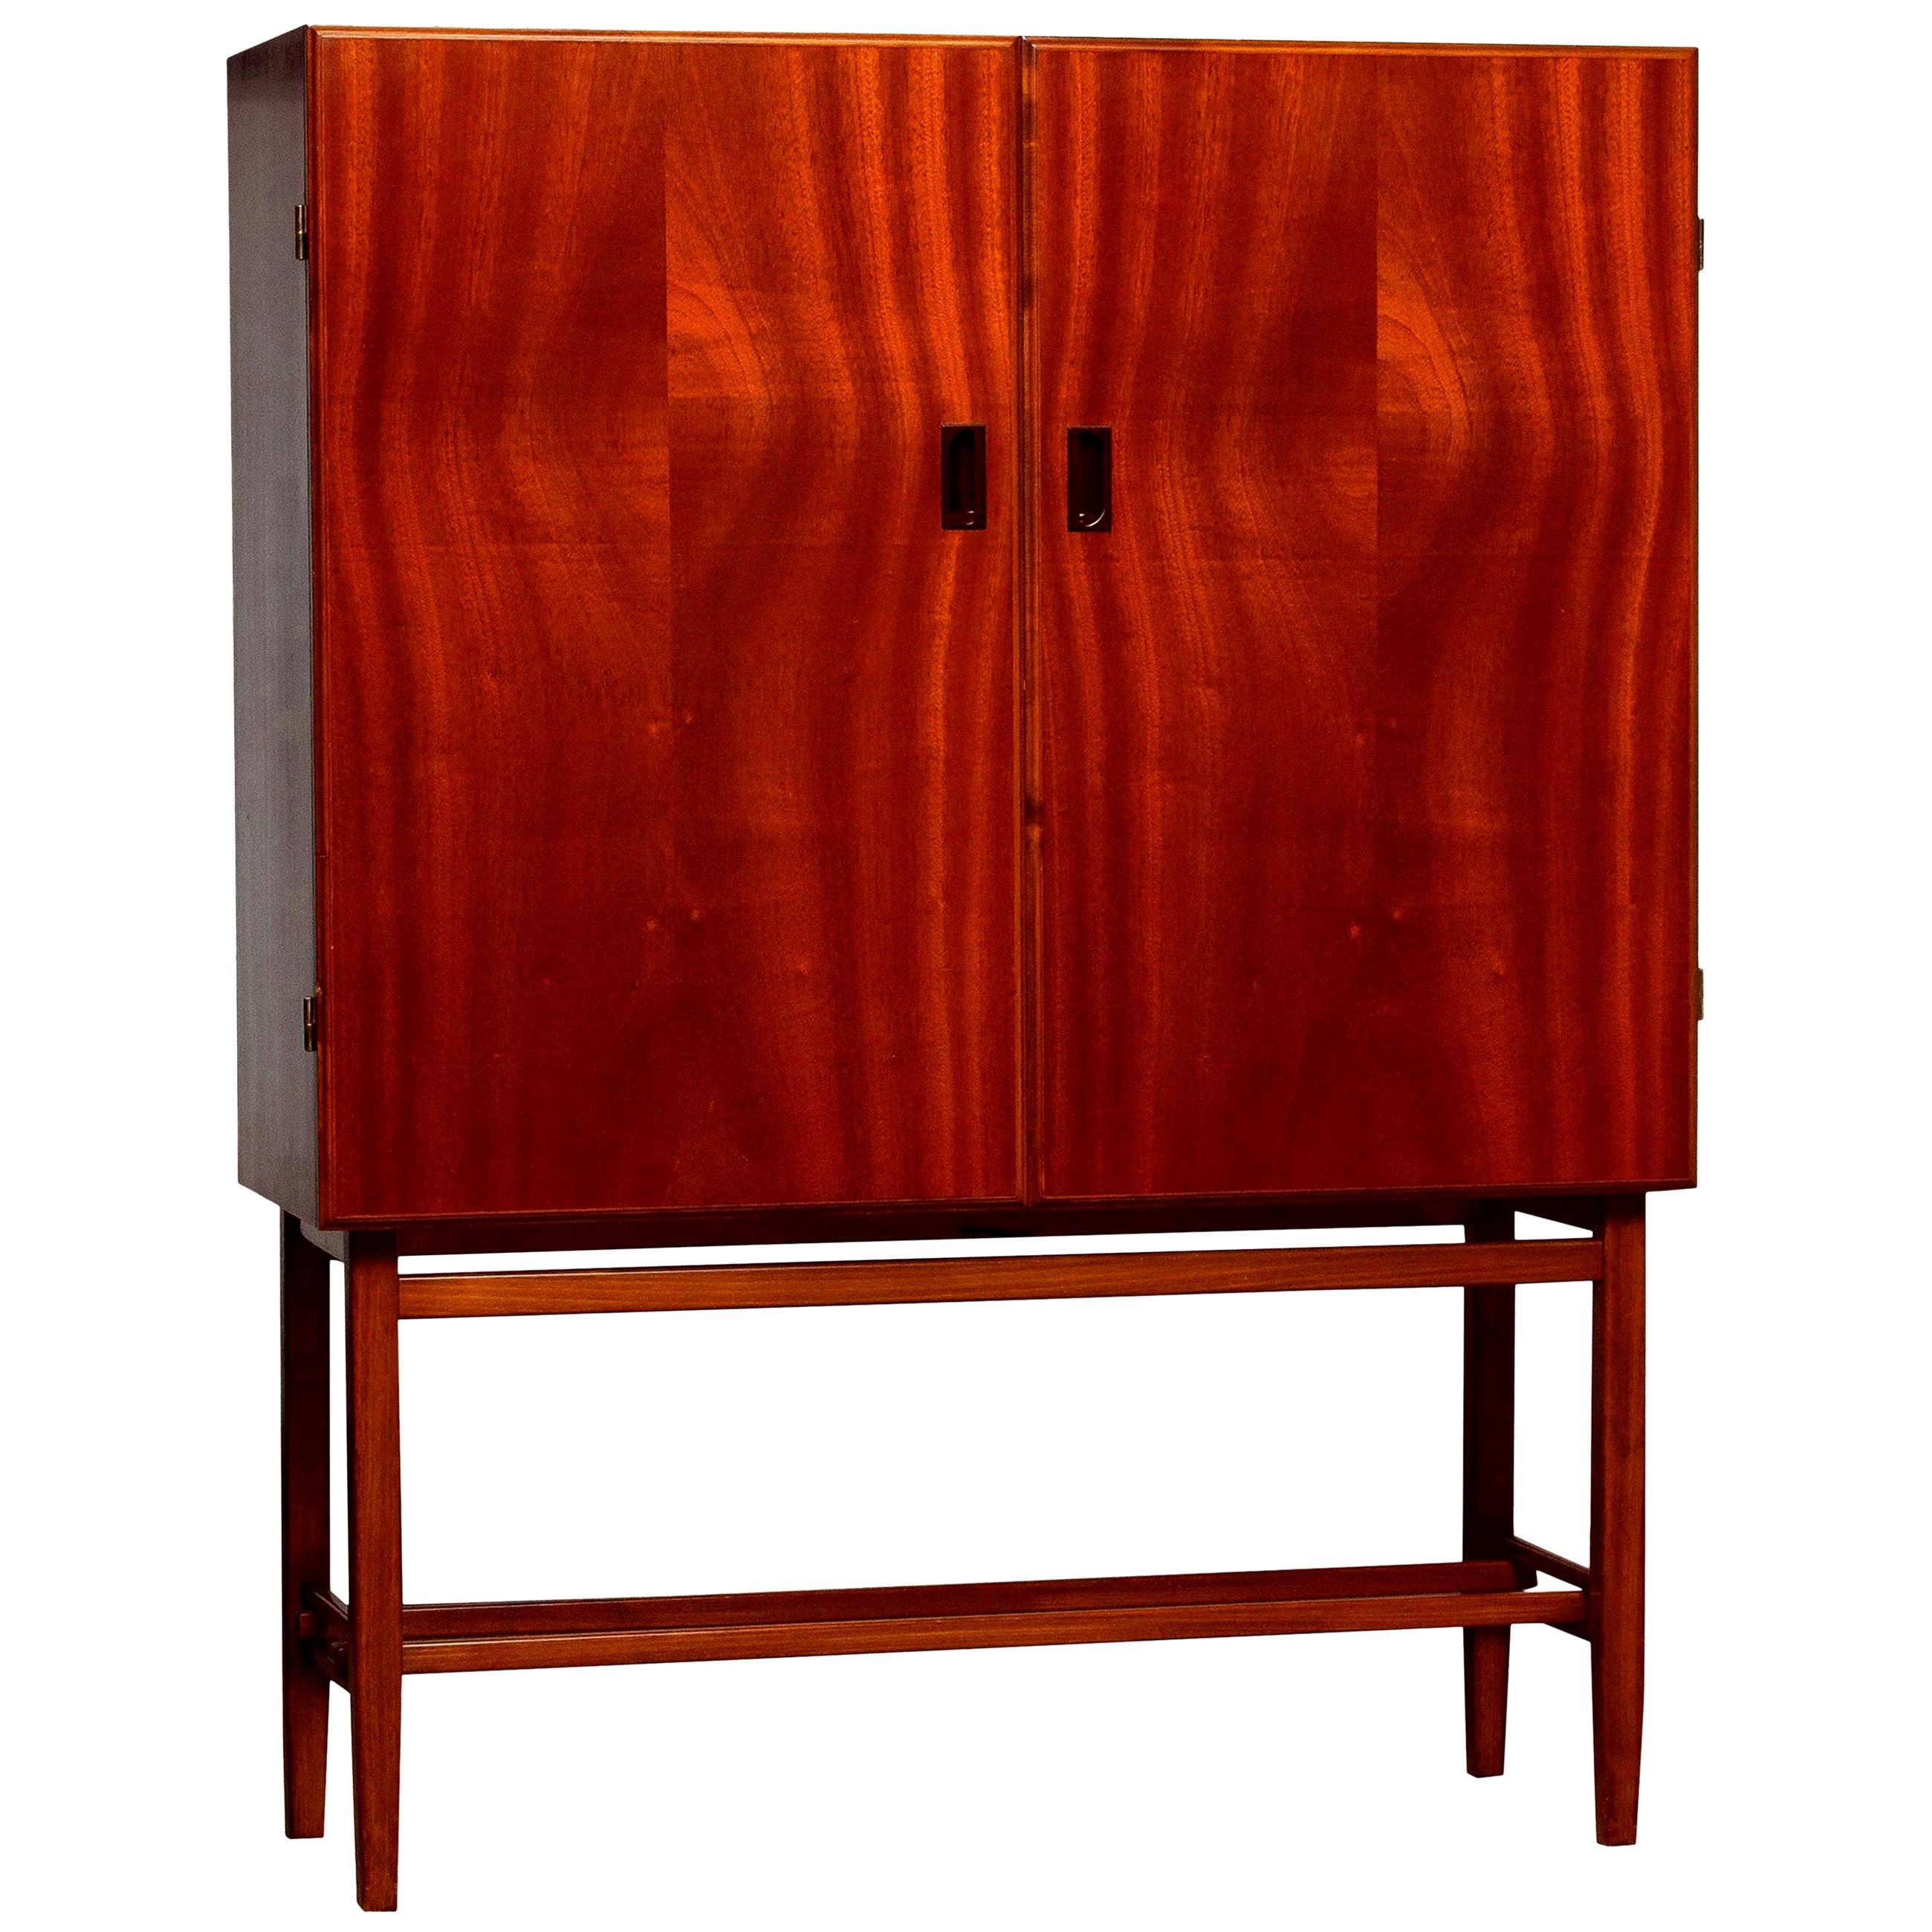 Beautiful dry bar or cabinet in mahogany made in Sweden, by Forenades Mobler of Linkoping, 1950s.
Equipped with two doors with behind two drawers and two adjustable shelves.
Standing on slim and tall legs.

The overall condition is very good.